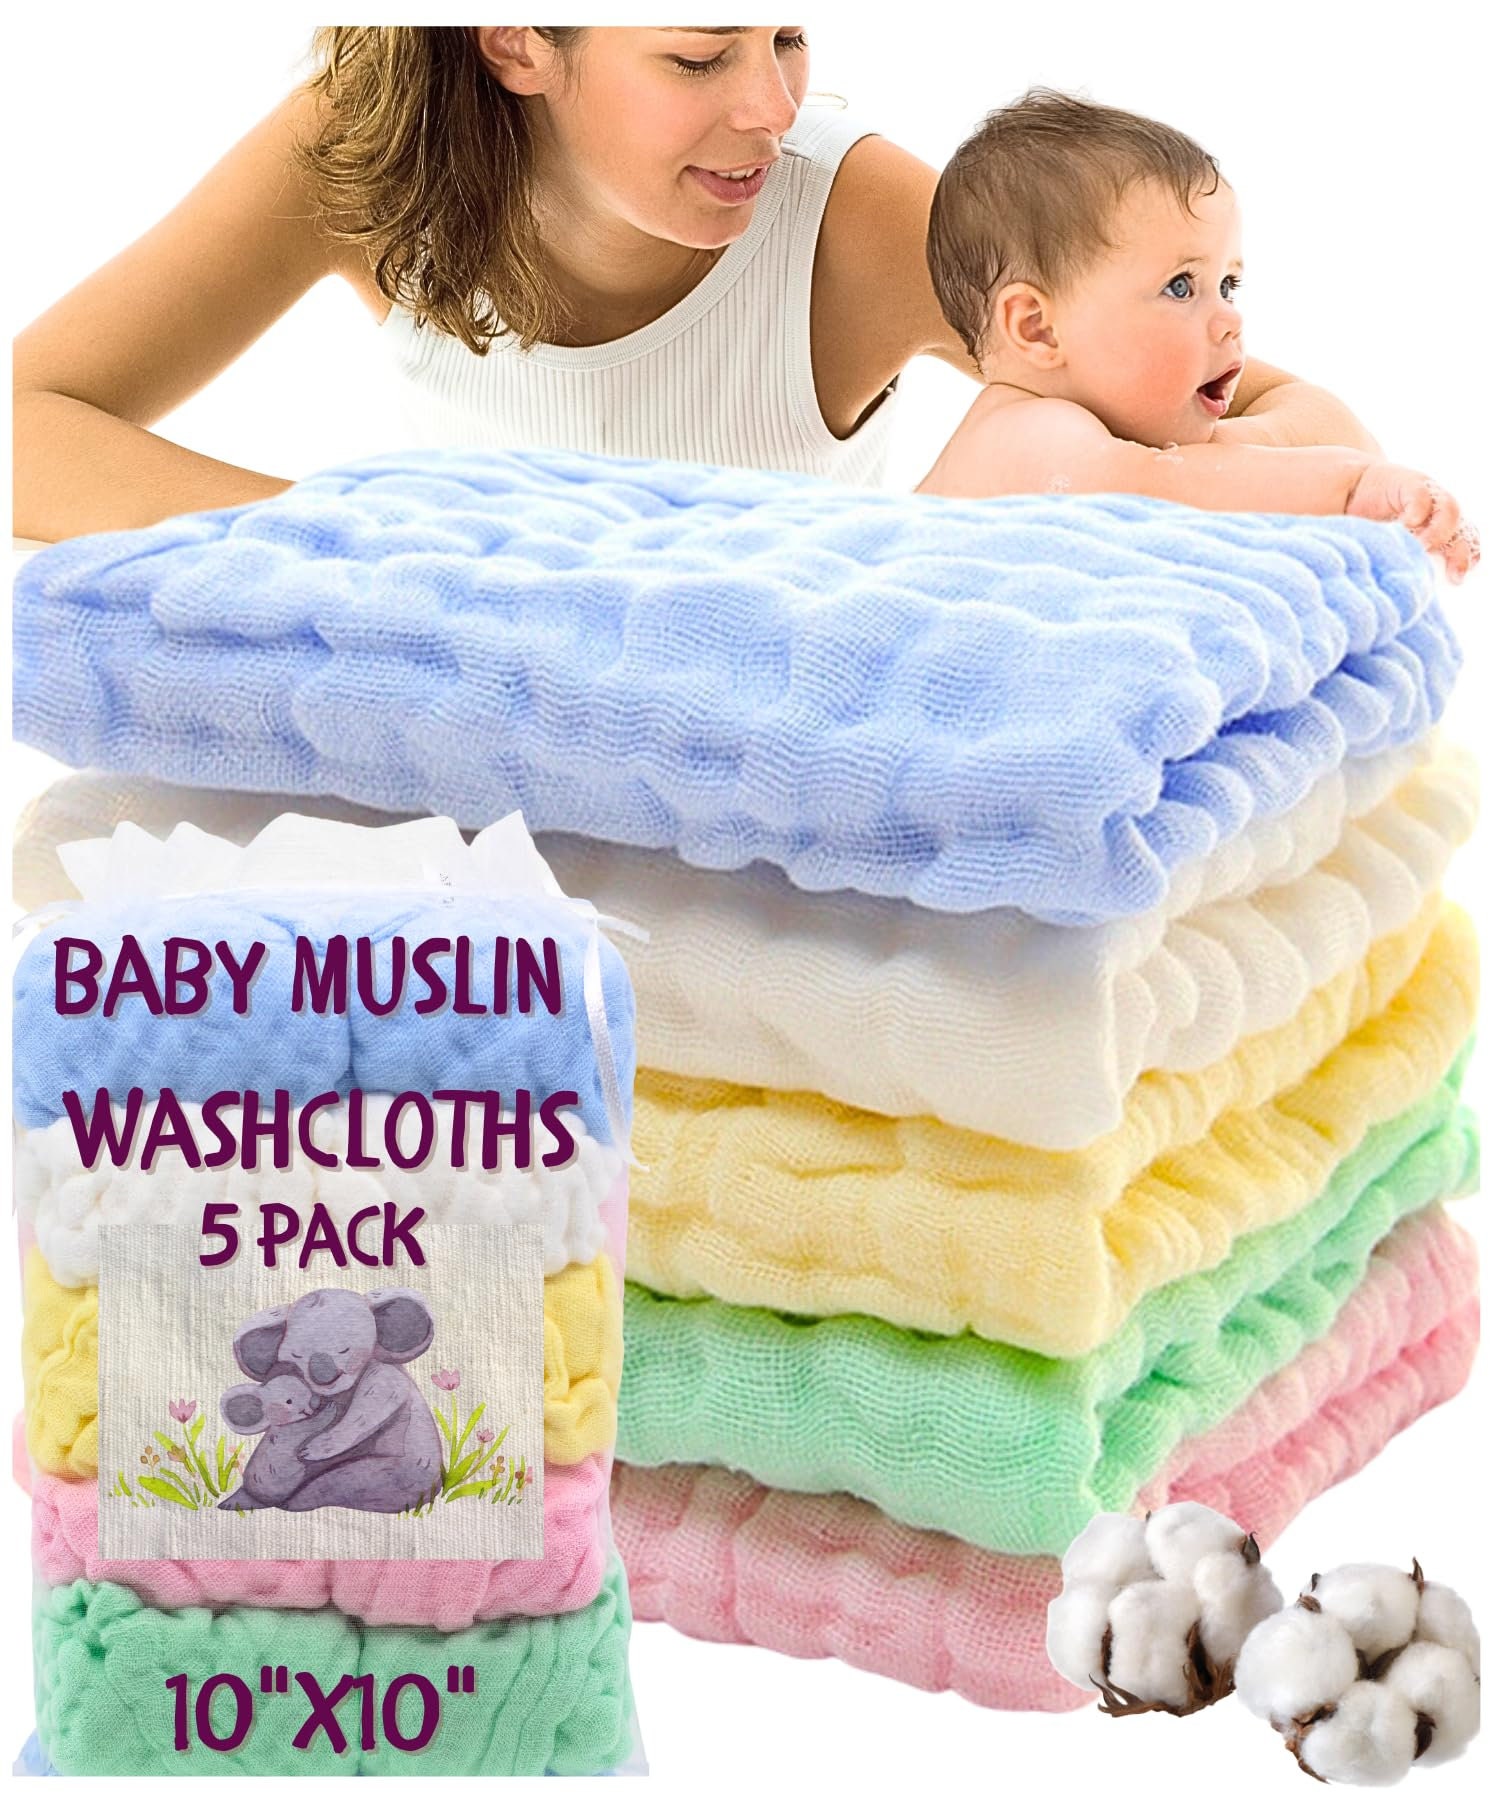 11 Pack Weber's Wonders Cotton Washcloths For Body & Face - Extra